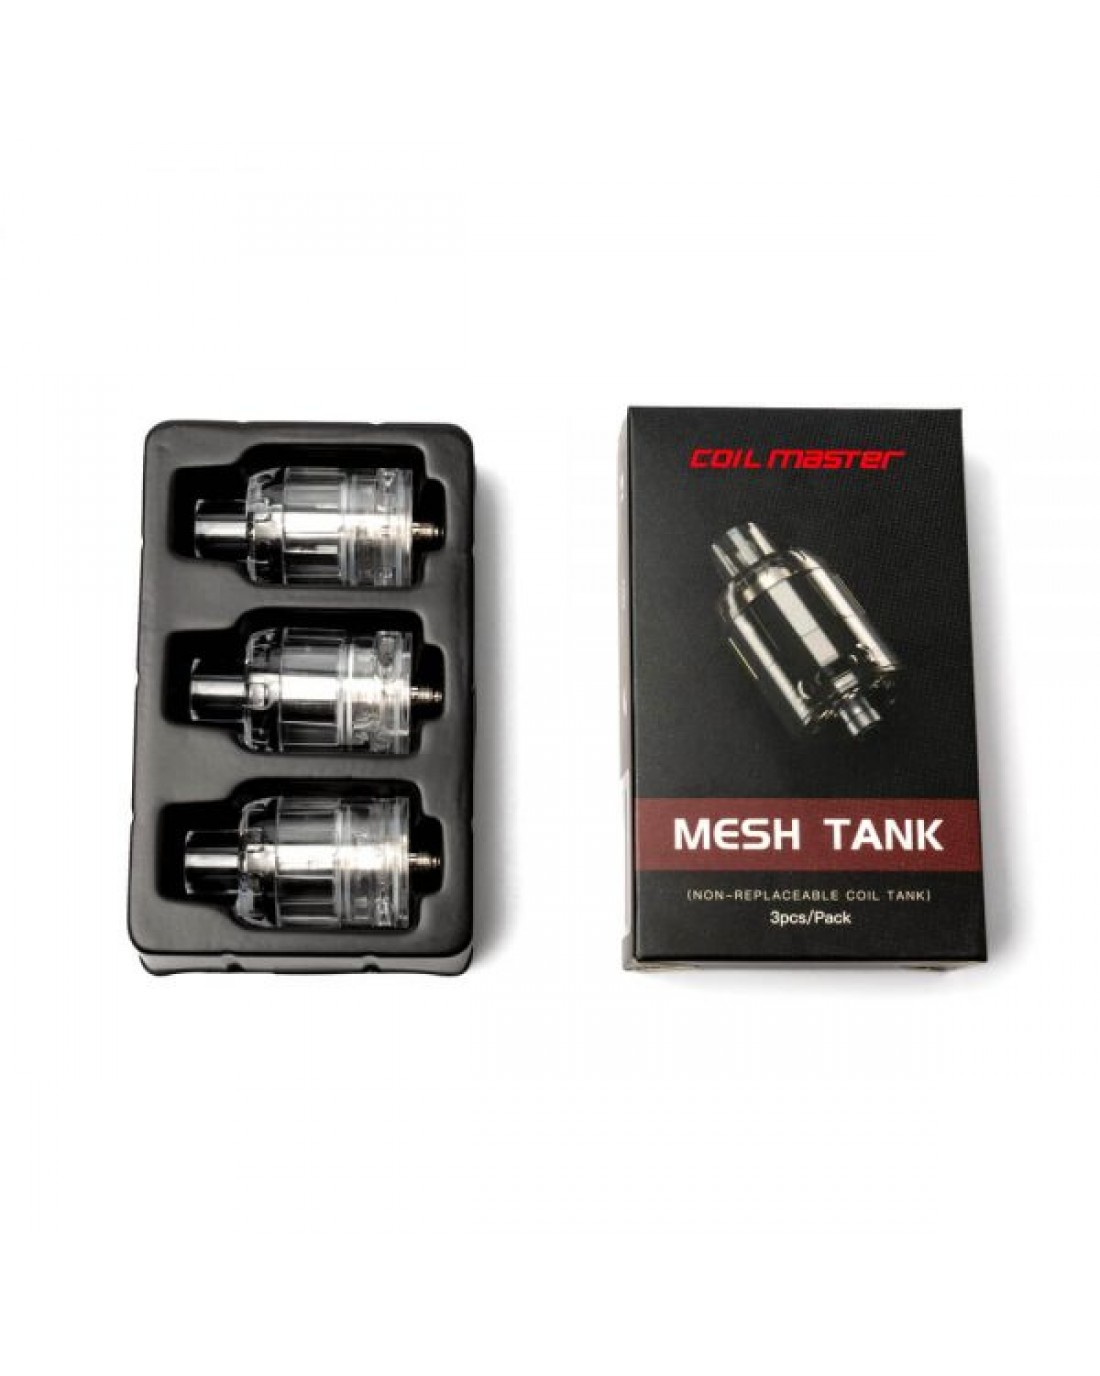 Master meshes. Mesh Coil сигарета. Etchip 2.0 flavor Master Coil. Coil Master купить. Coil Master купить FKB'rcghtc.